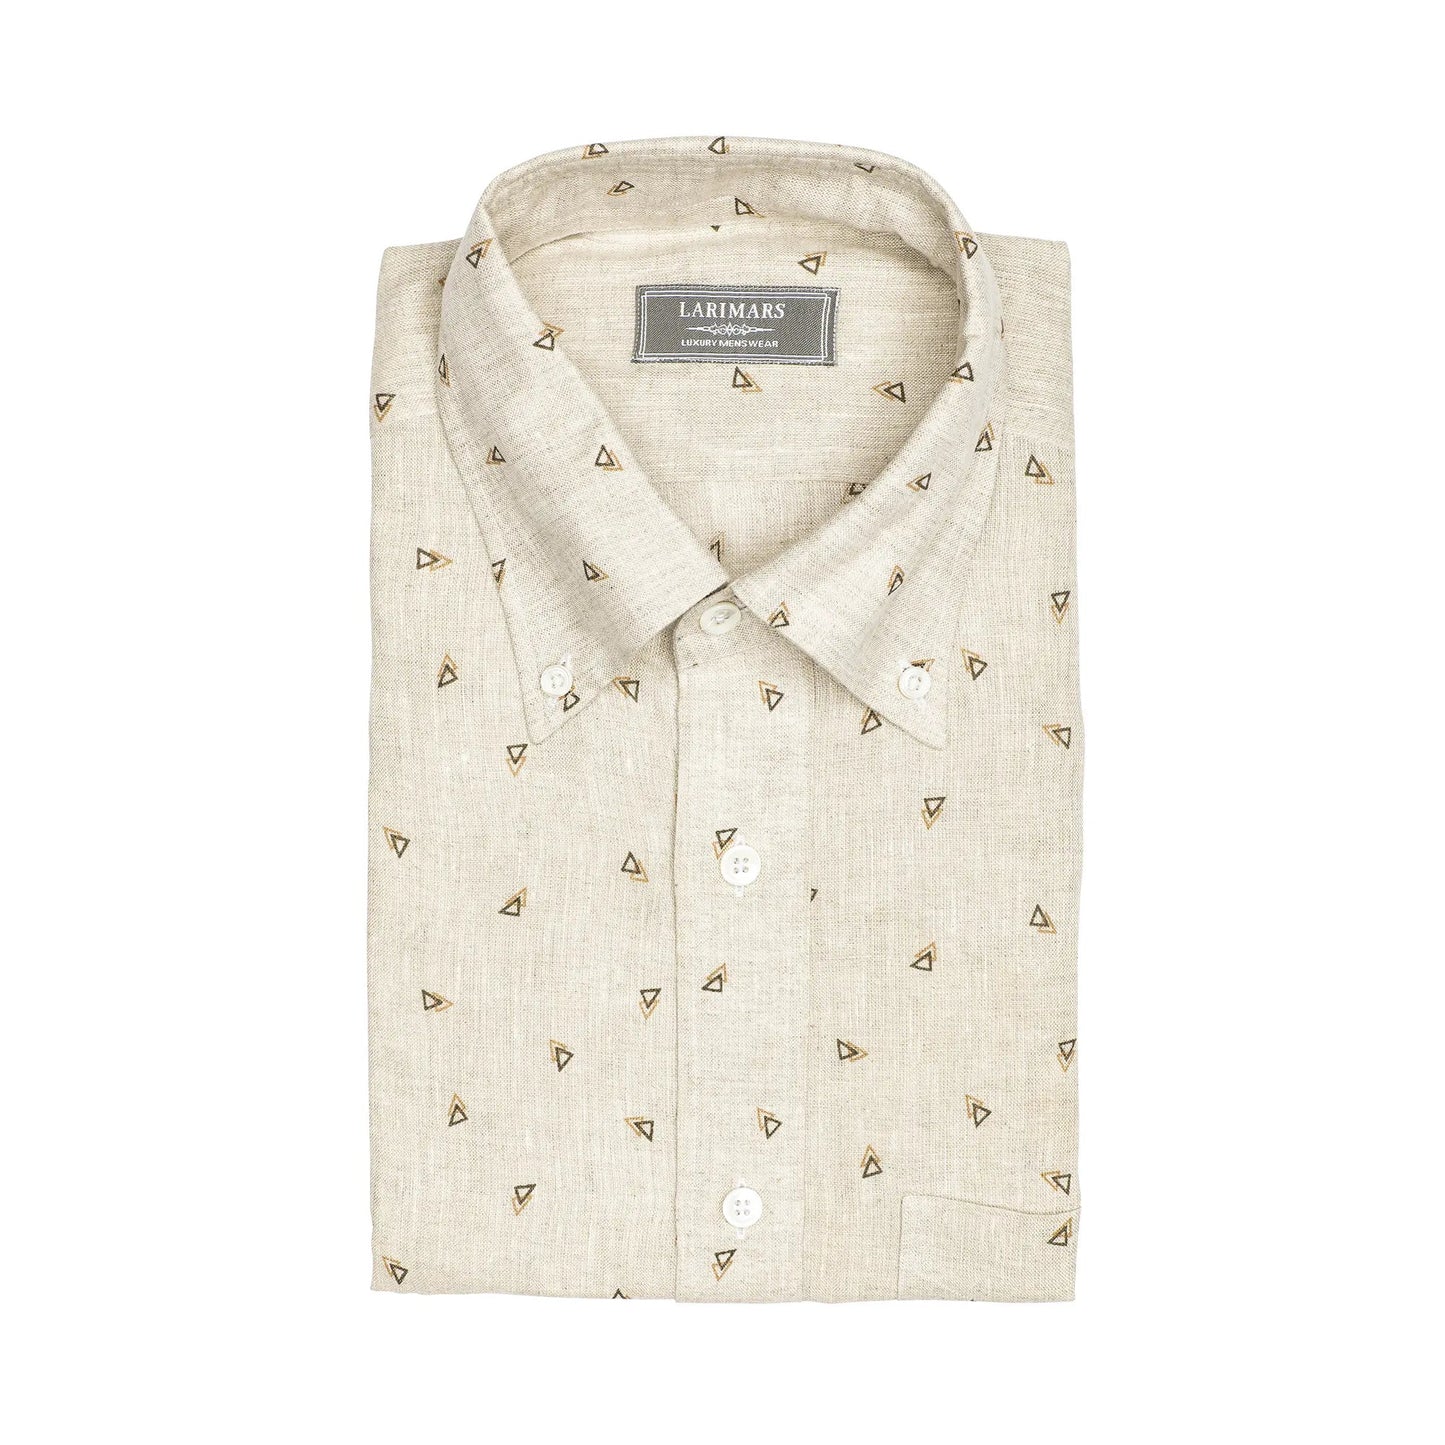 Classic Linen Beige Print - Larimars Clothing Men's Formal and casual wear shirts